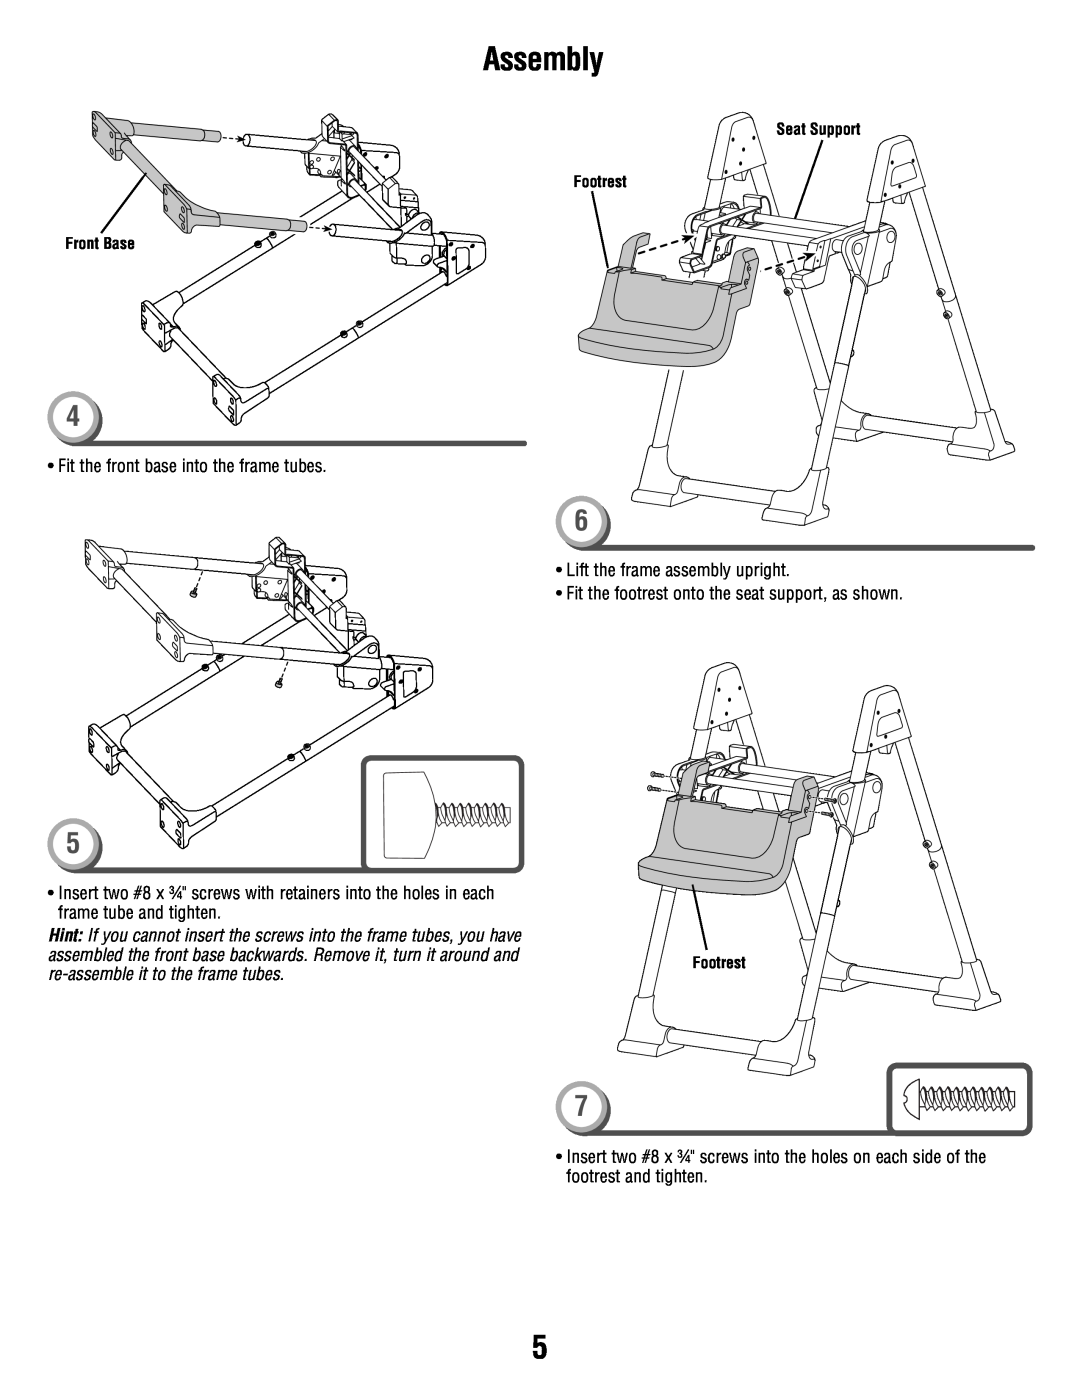 Fisher-Price P9043 manual Assembly, Fit the front base into the frame tubes 